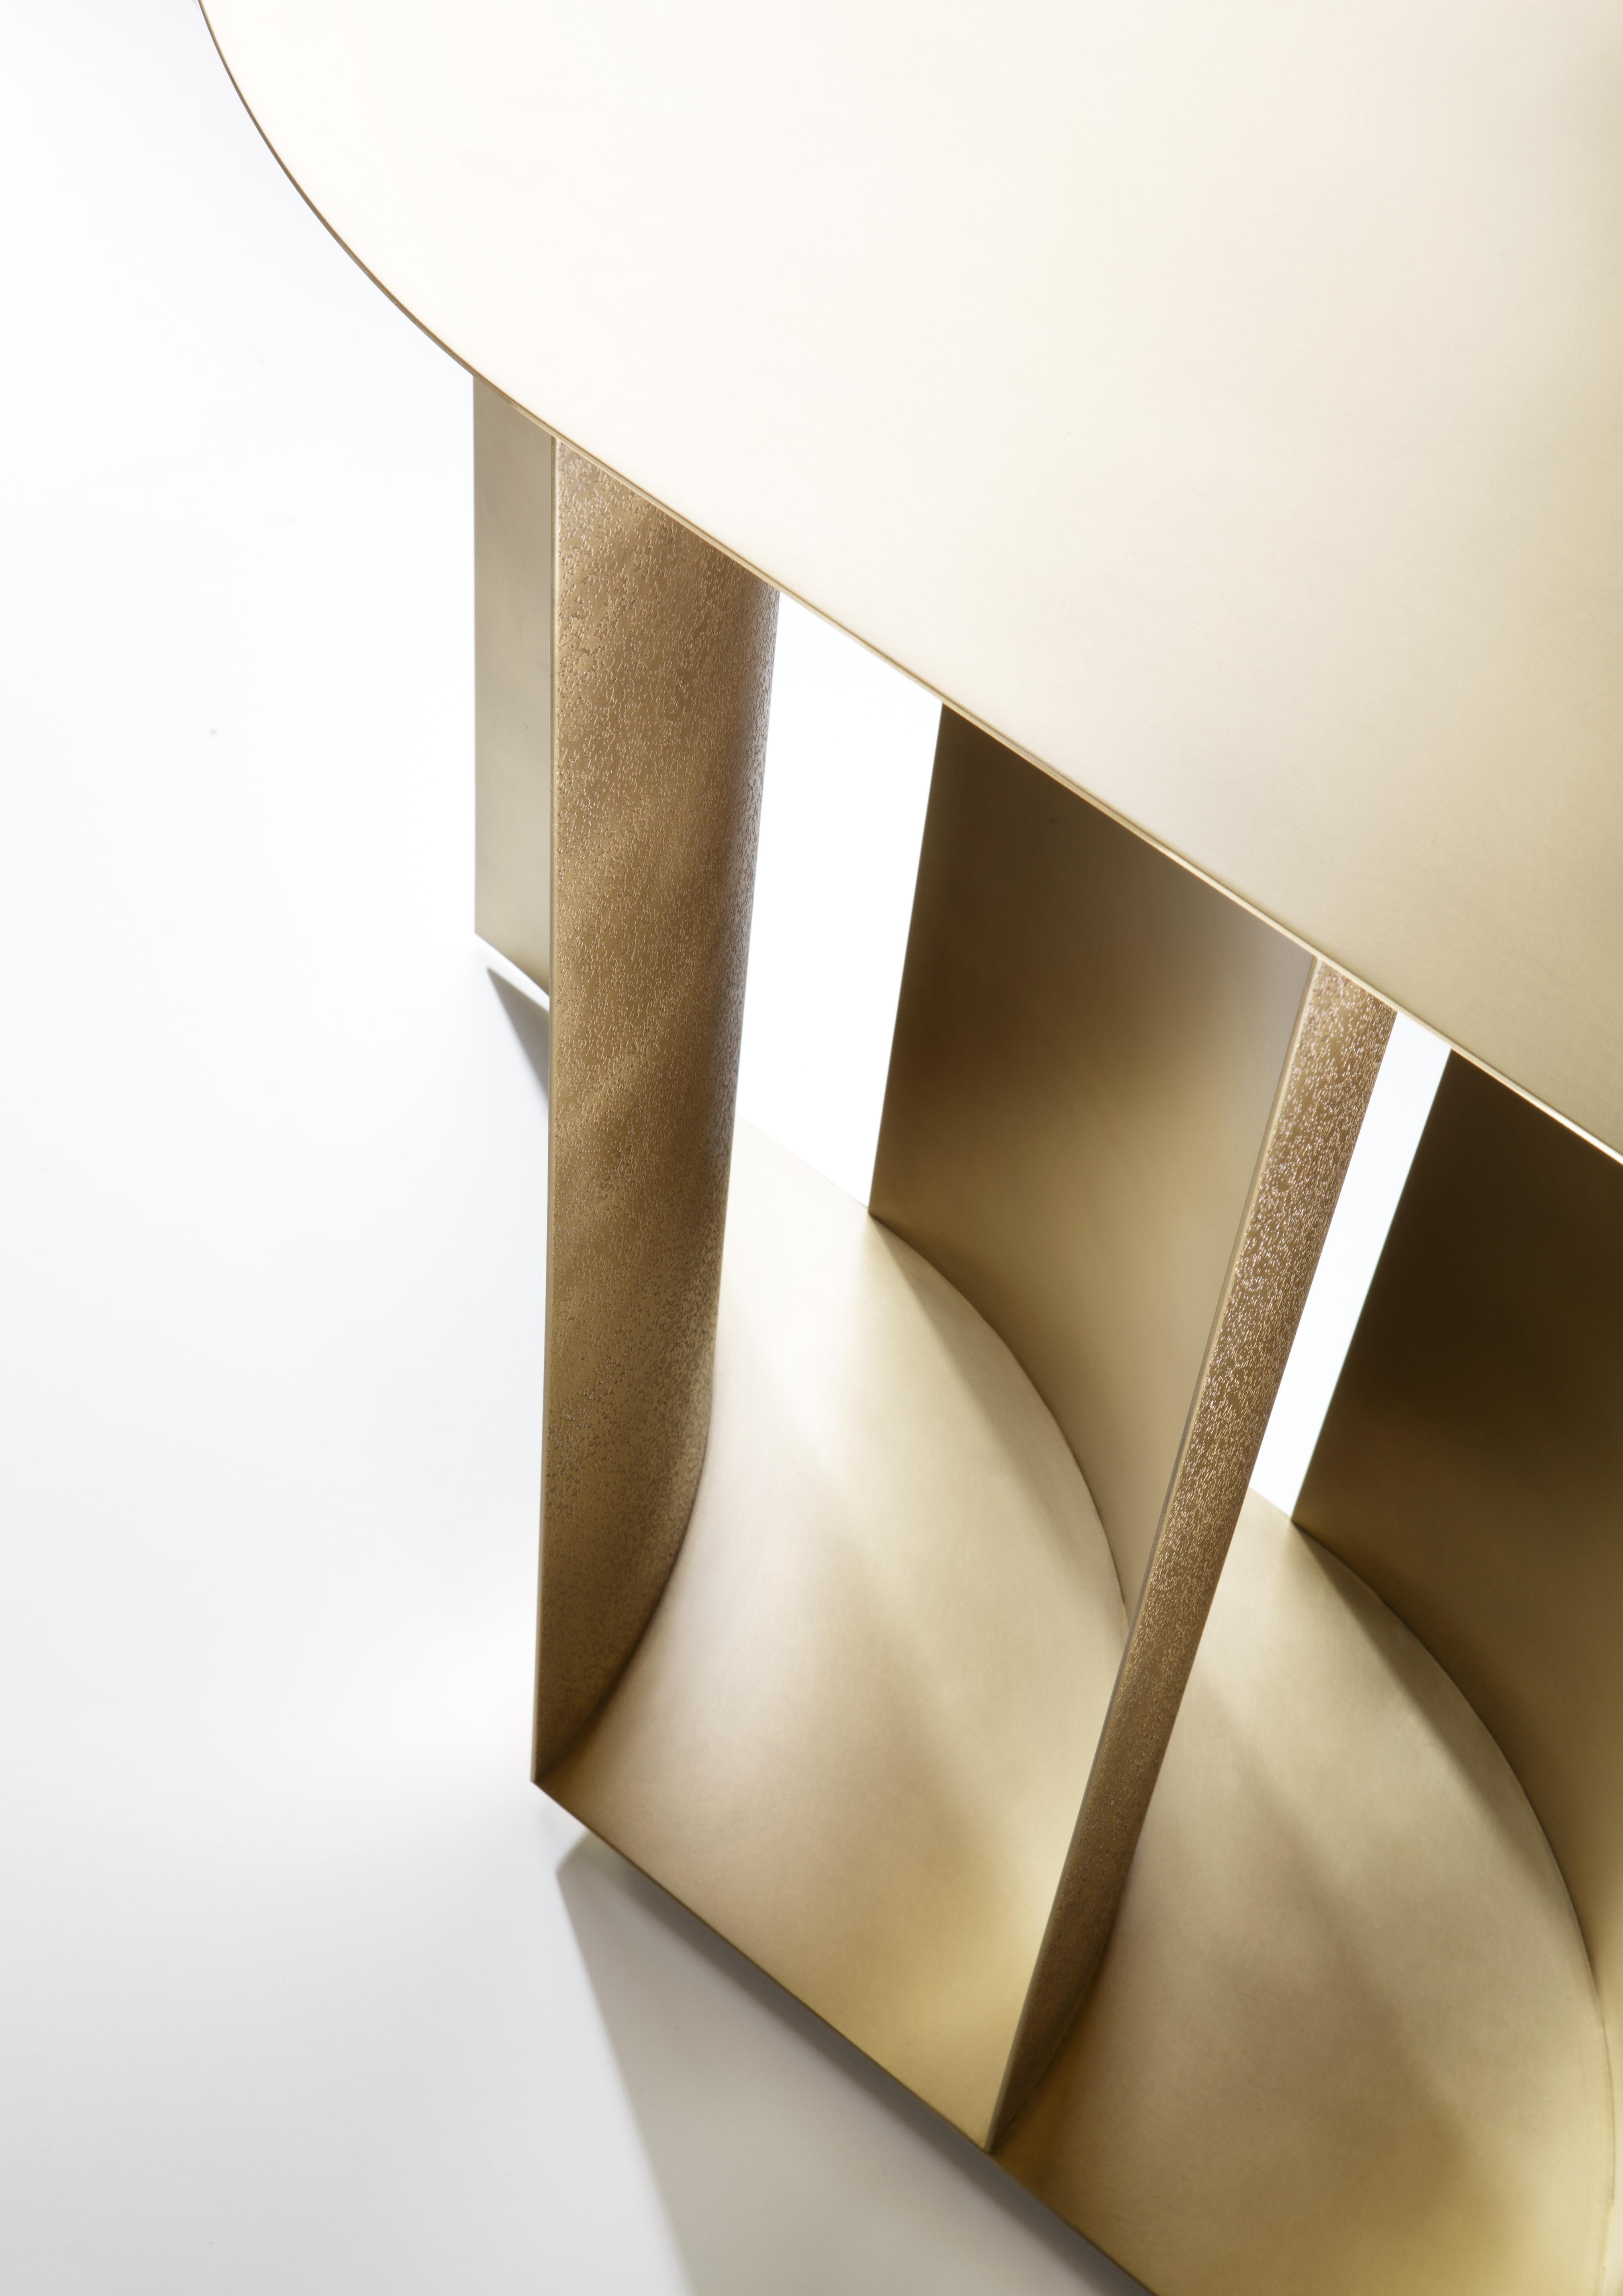 A series of curved brass sheets form the base of Sinestesia encapsulating the solidity and expressiveness of metal.
With rounded edges, the leaf-like top of the console rests on the curvature of the metal sheets below, playing with positive and